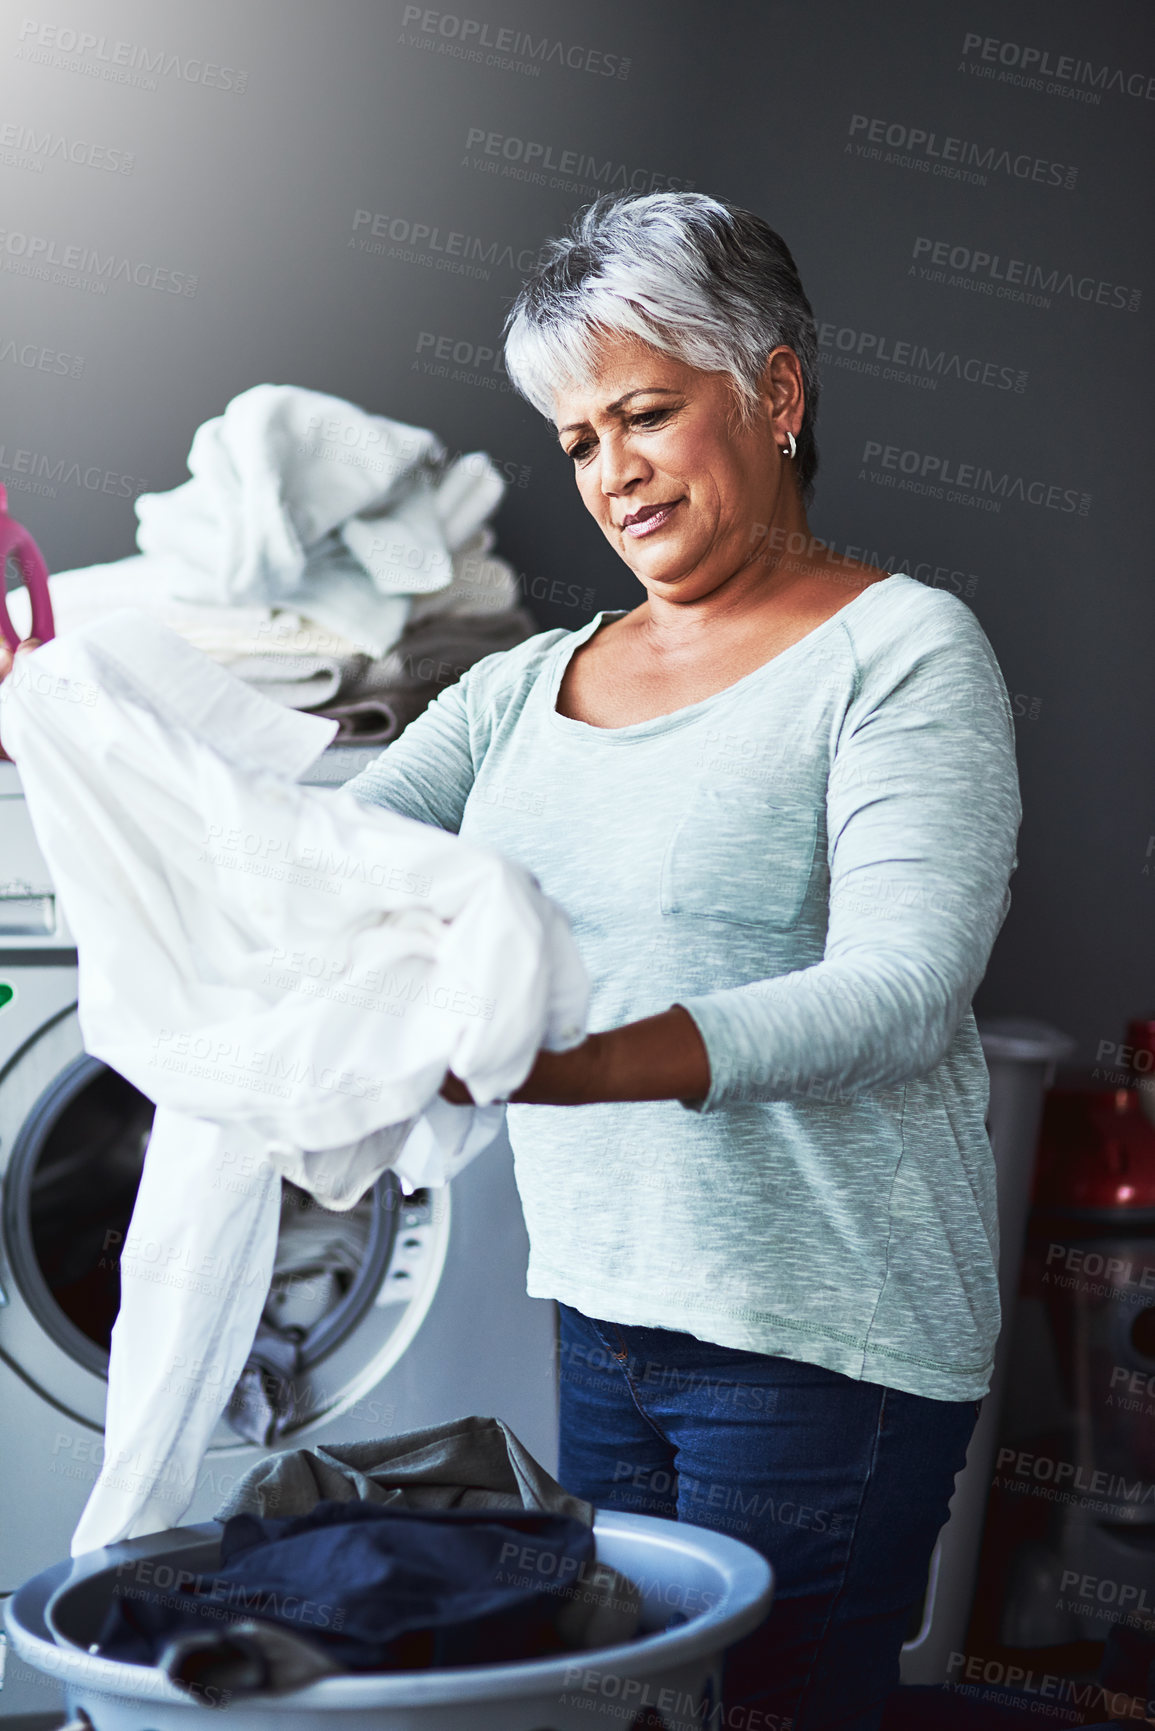 Buy stock photo Shot of a mature woman doing laundry at home